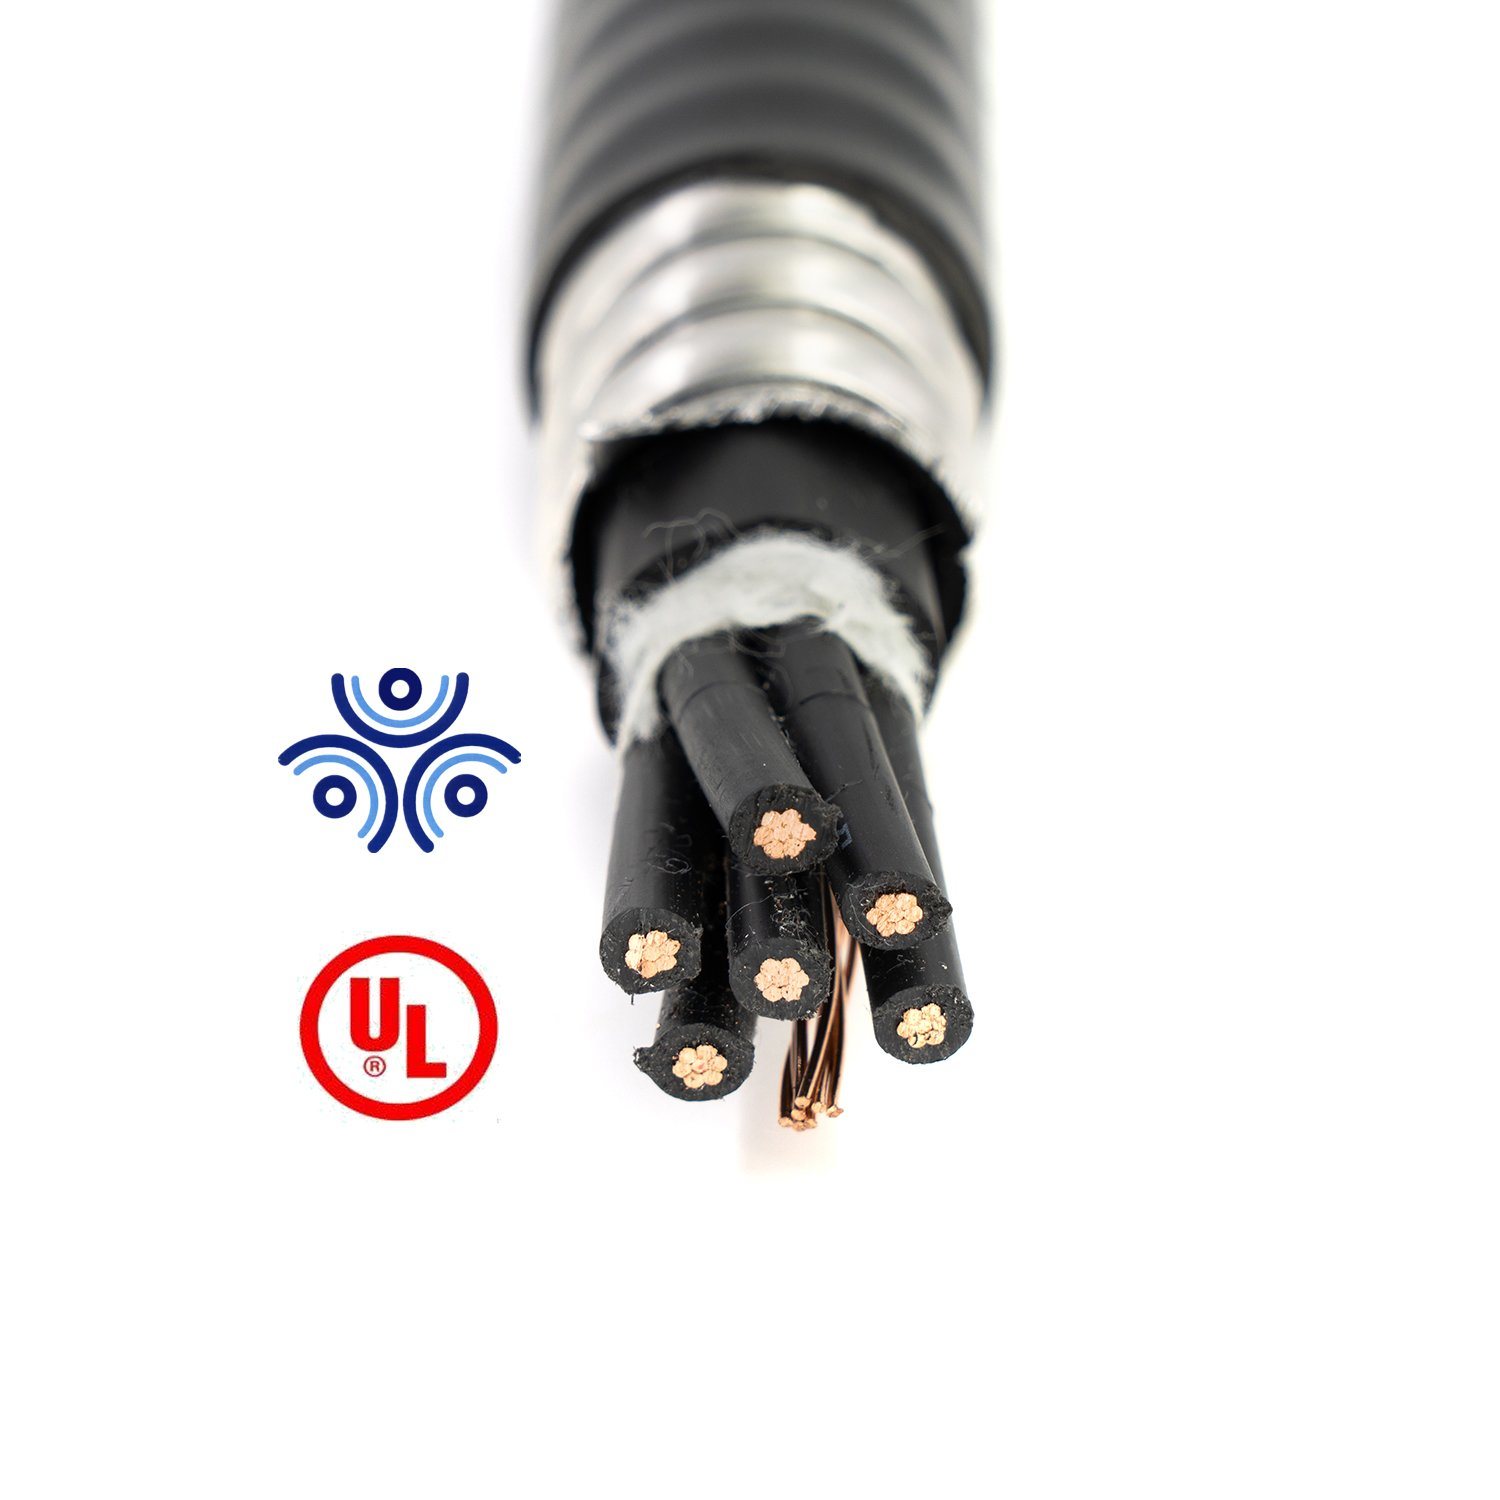 Aluminum Power Cable Electric CSA cUL Teck90 4 Core with Ground Wire